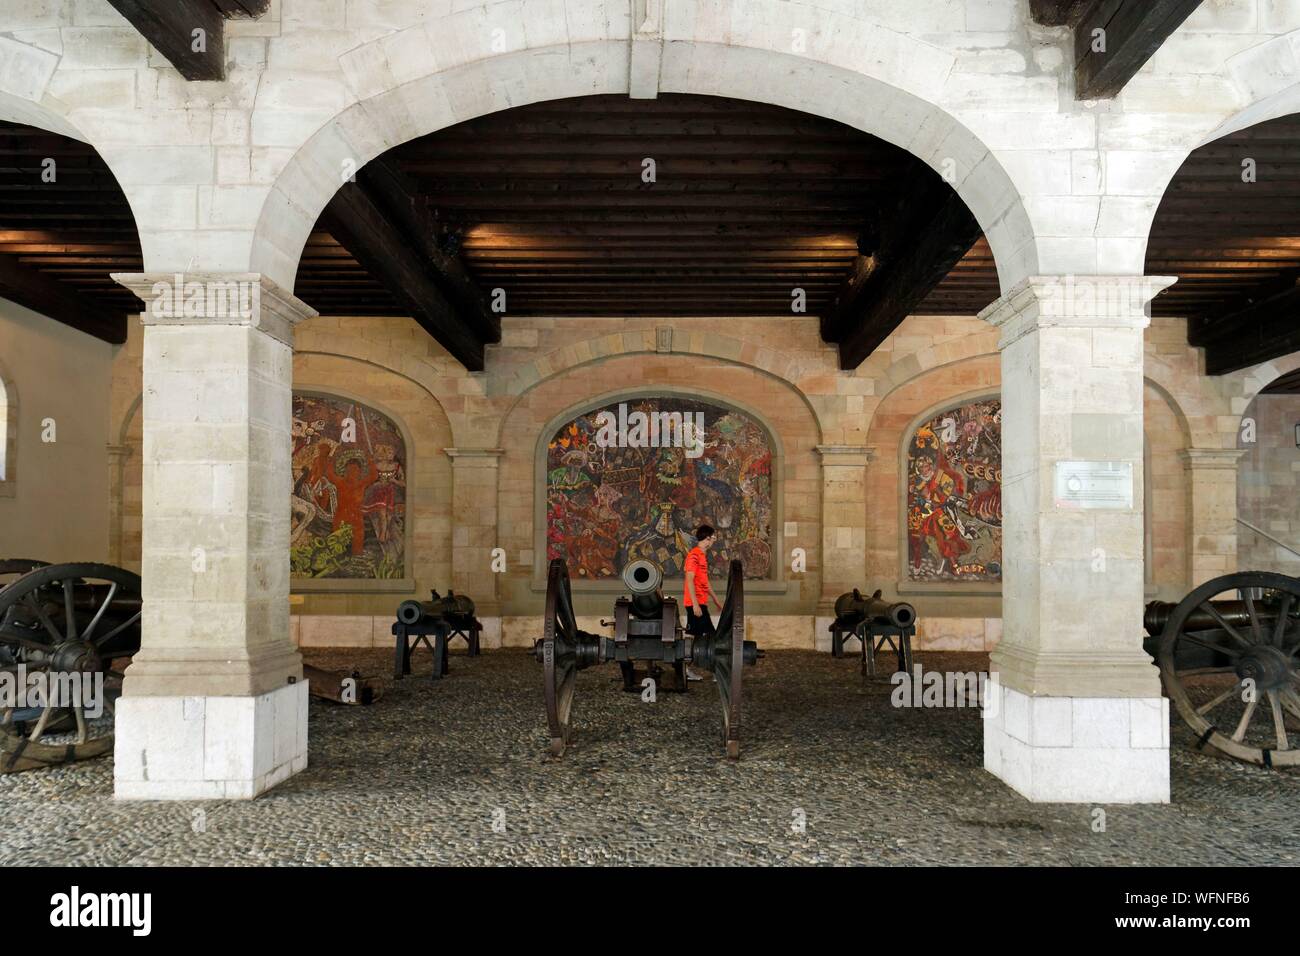 Switzerland, Geneva, Swiss Confederation, in the old town the guns and the ceramic frescoes of the covered square of St. Peter Street Stock Photo